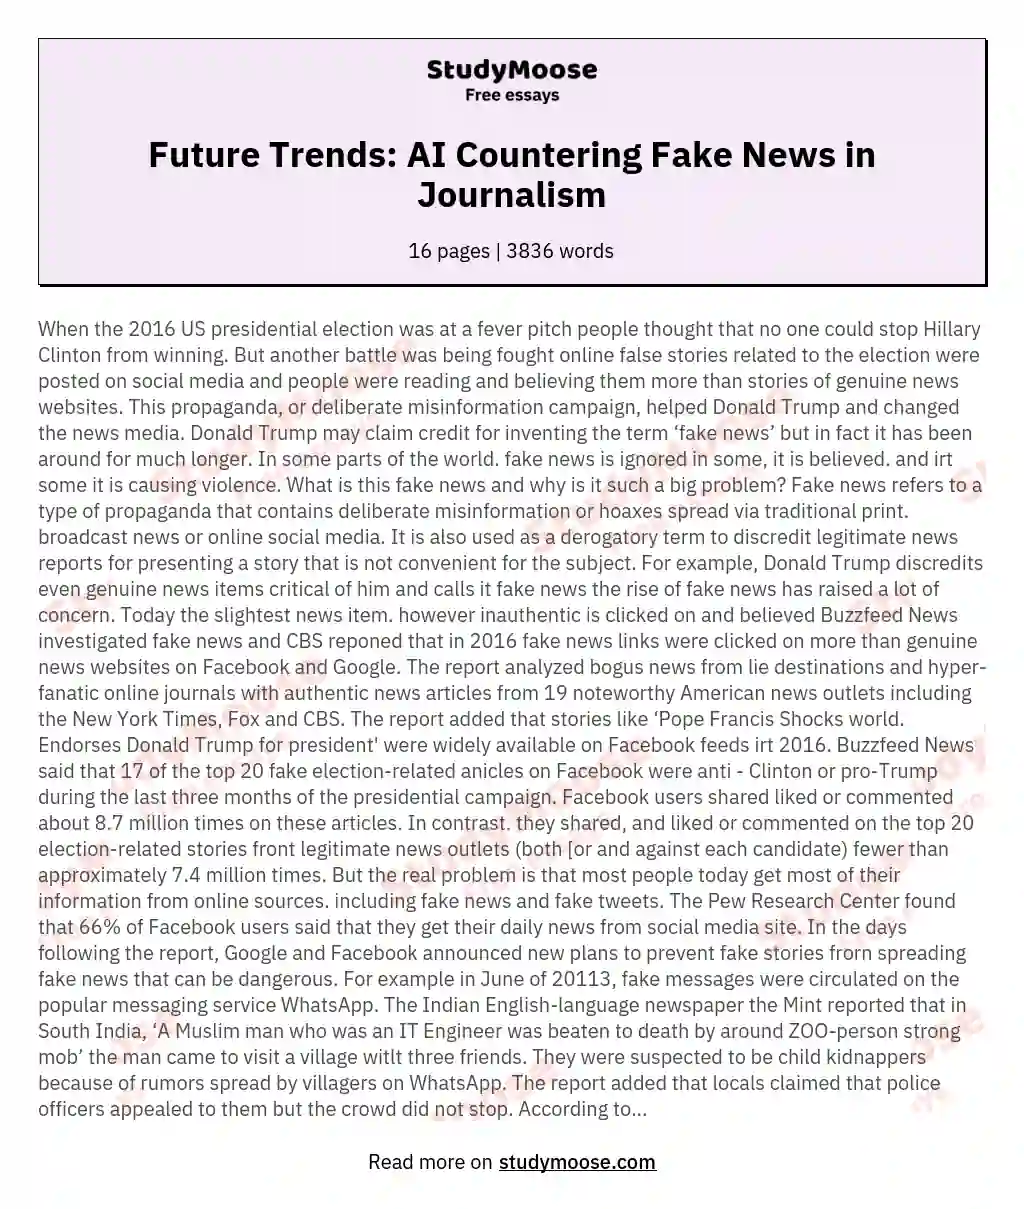 Future Trends: AI Countering Fake News in Journalism essay